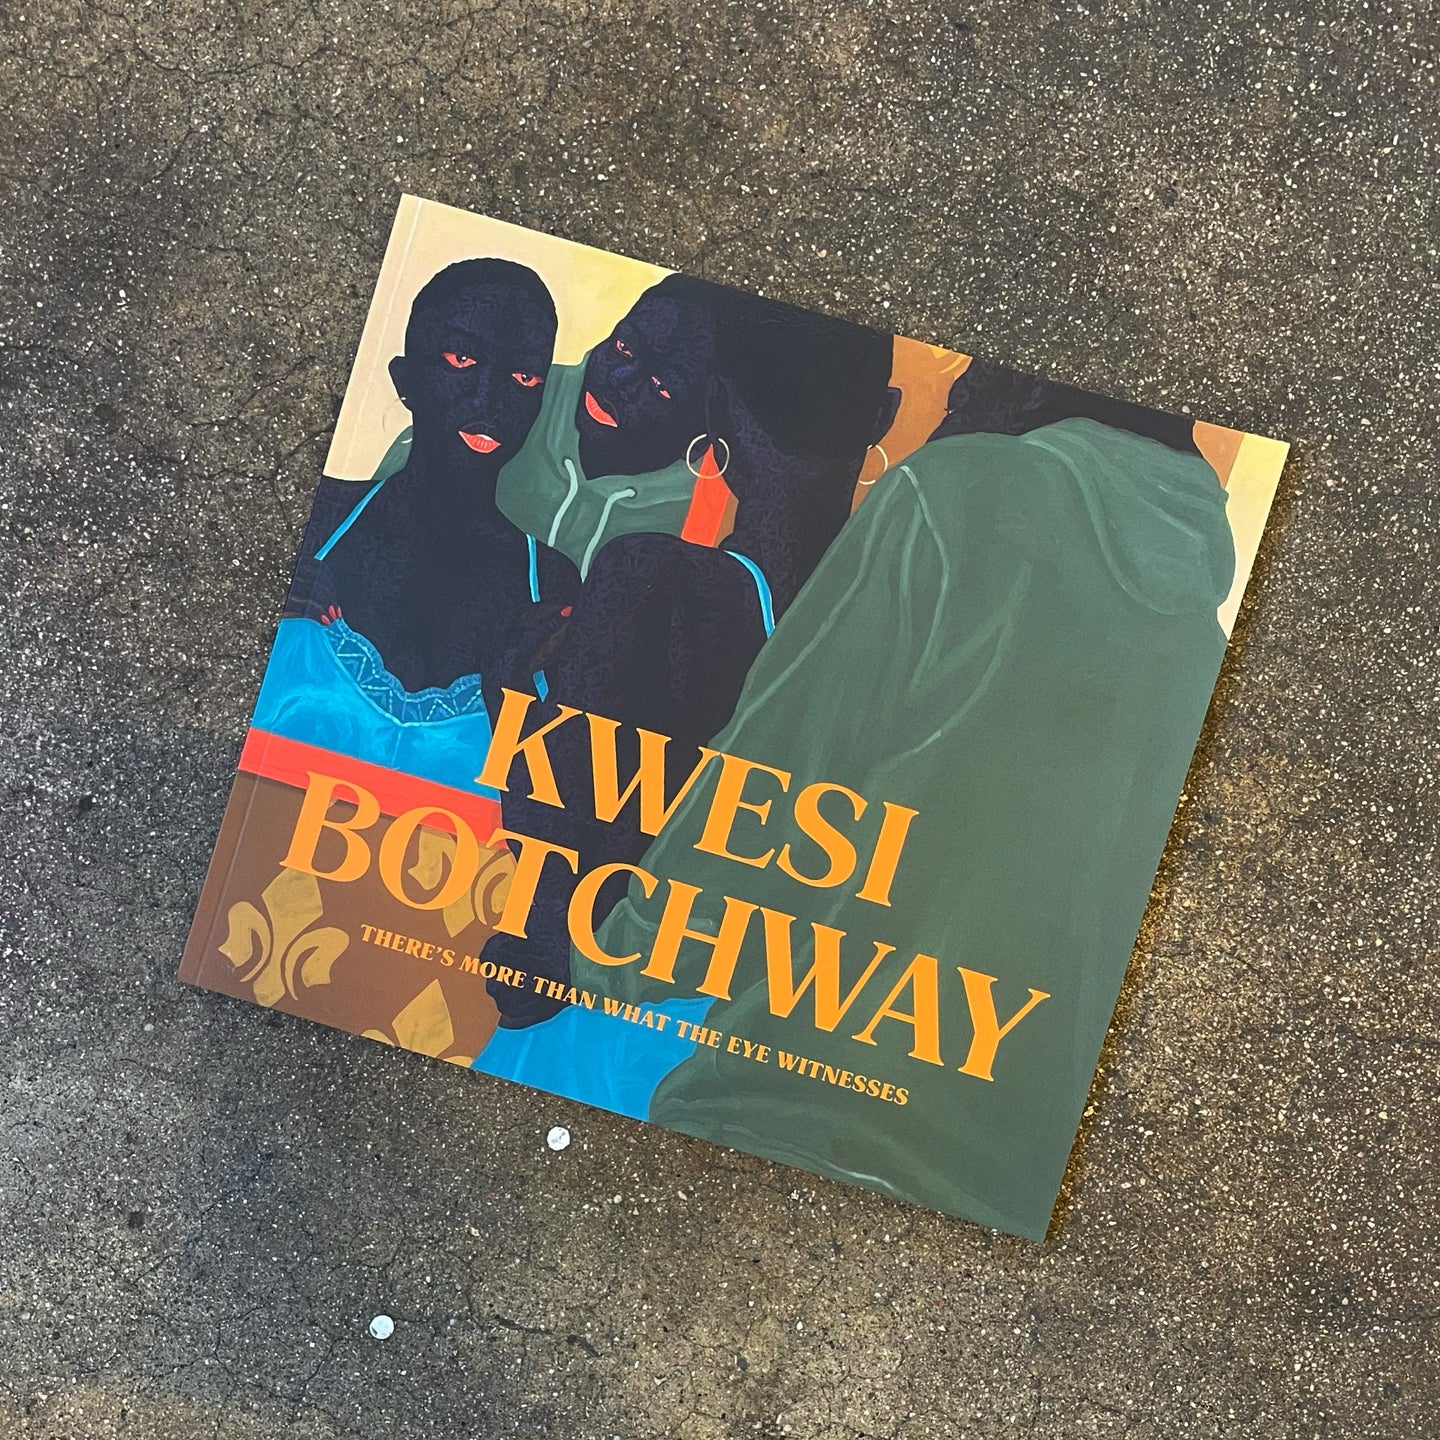 Kwesi Botchway: There's More Than What The Eye Witnesses